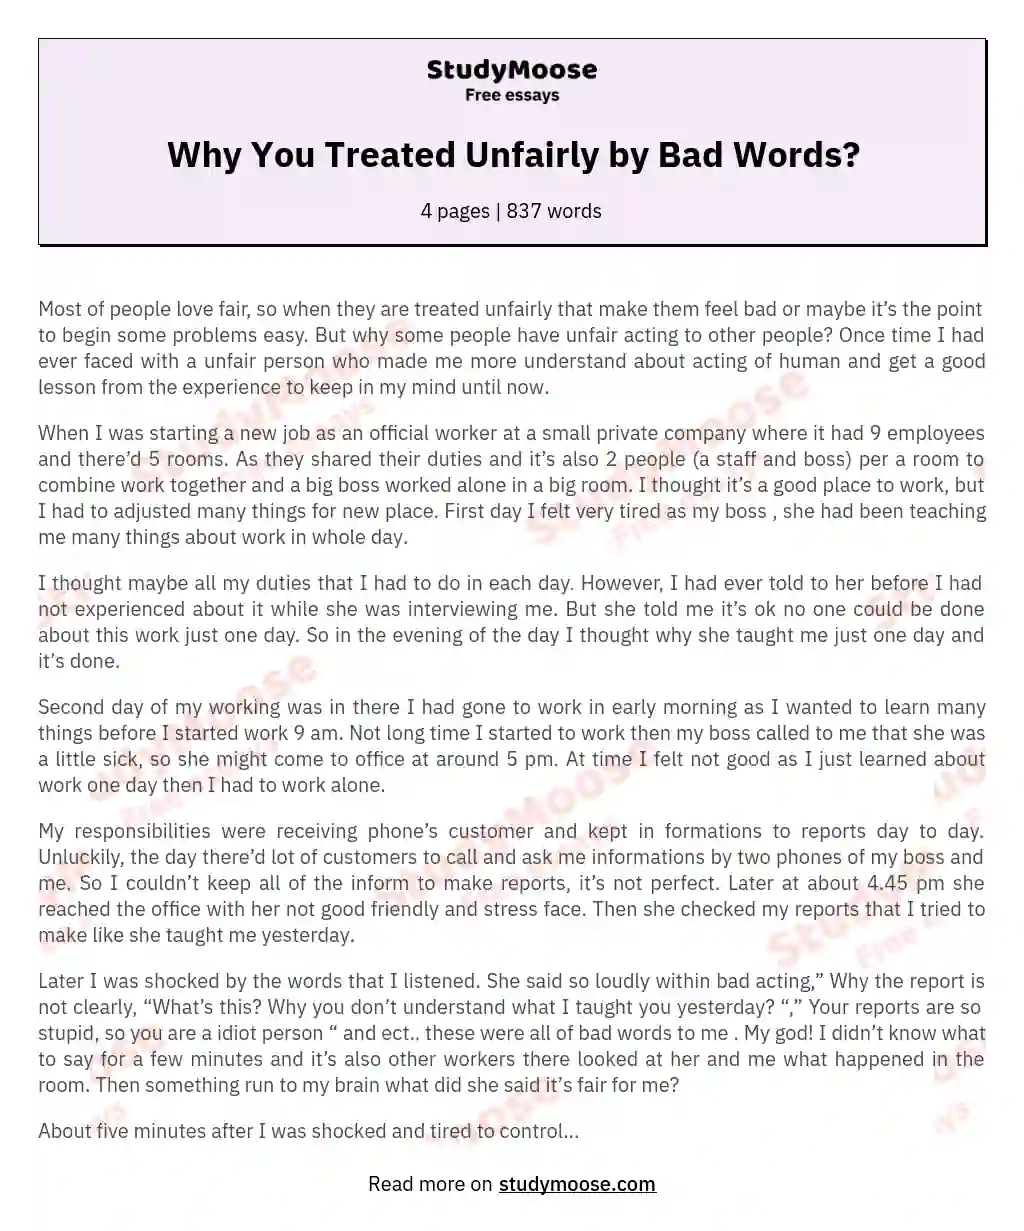 Why You Treated Unfairly by Bad Words?